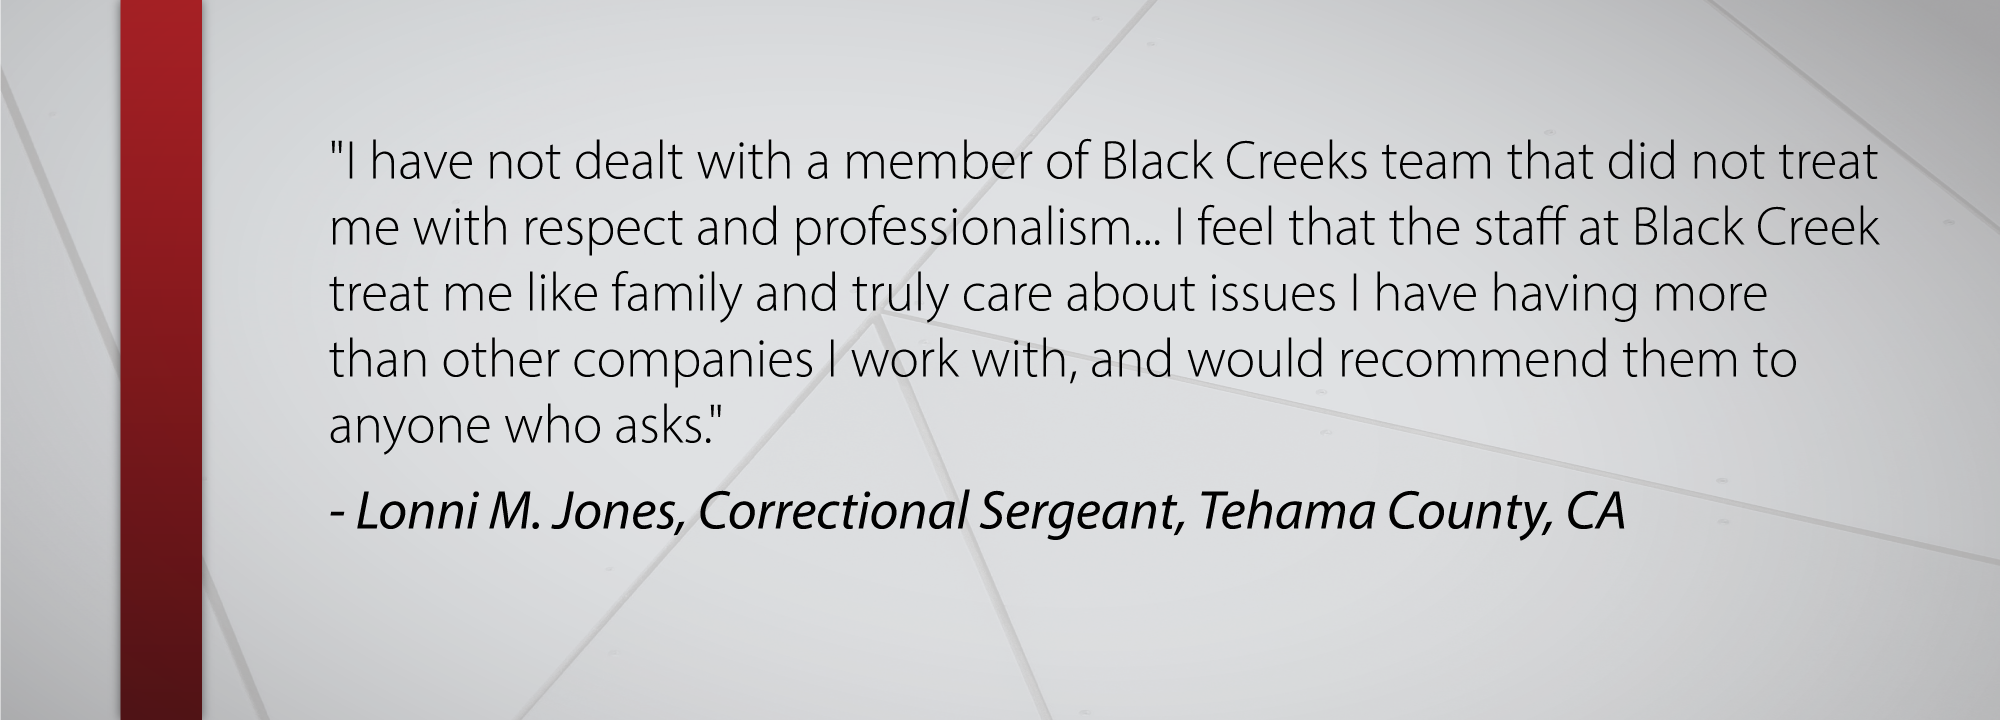 I have not dealt with a member of Black Creeks team that did not treat me with respect and professionalism... I feel that the staff at Black Creek treat me like family and truly care about issues I have having more than other companies I work with, and would recommend them to anyone who asks. - Lonni M. Jones, Correctional Sergeant, Tehama County, CA